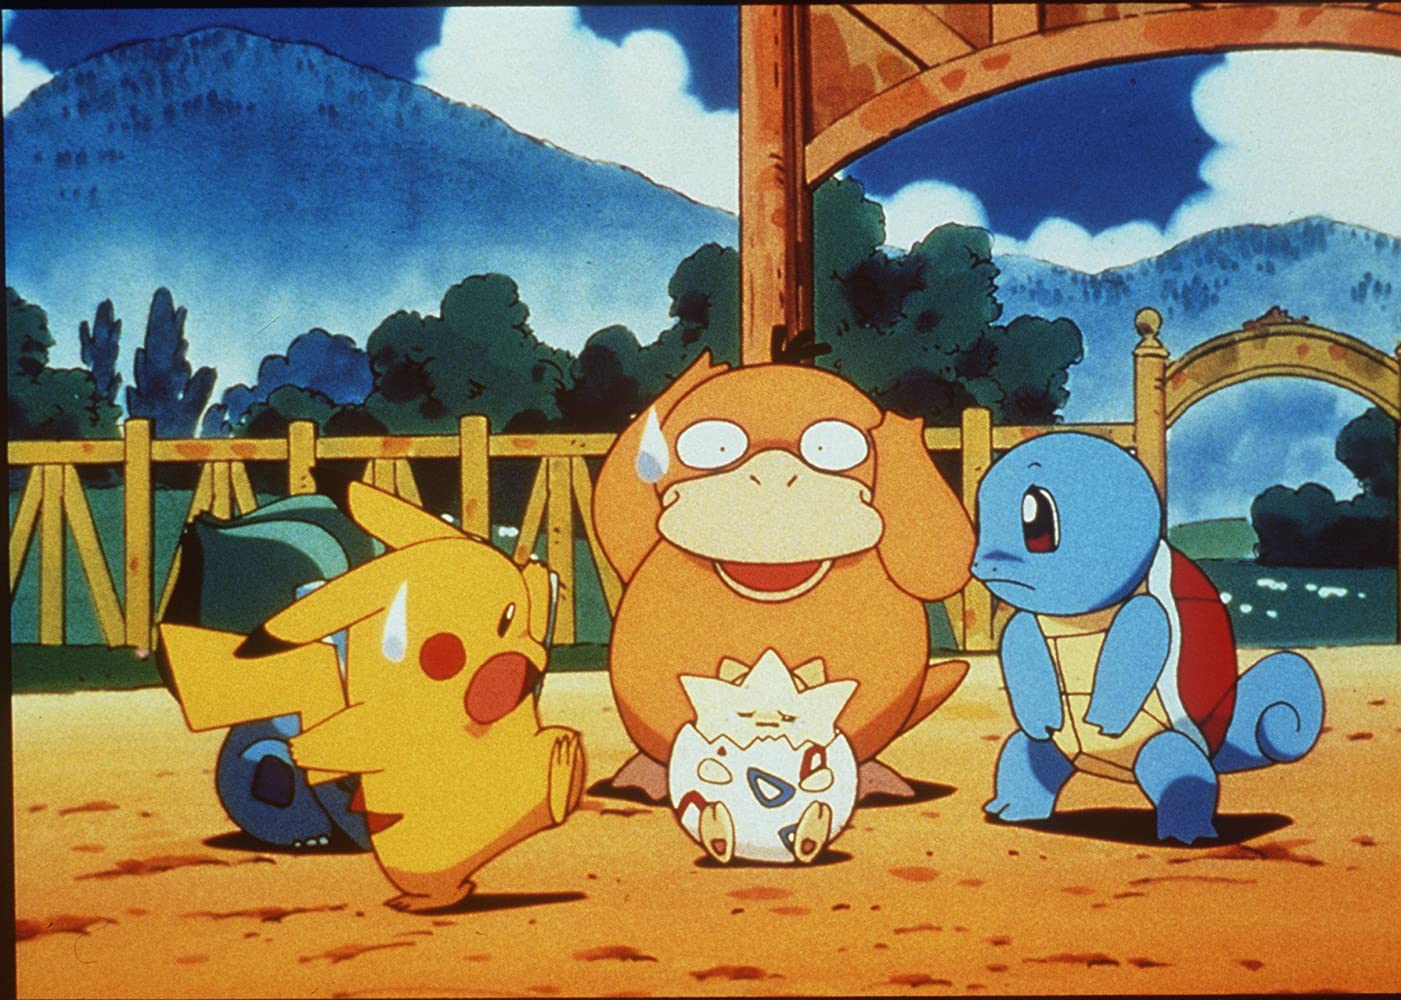 Pikachu, Psyduck, and Squirtle having no idea what to do with an upset Togepi (Image: 4Kids Entertainment)